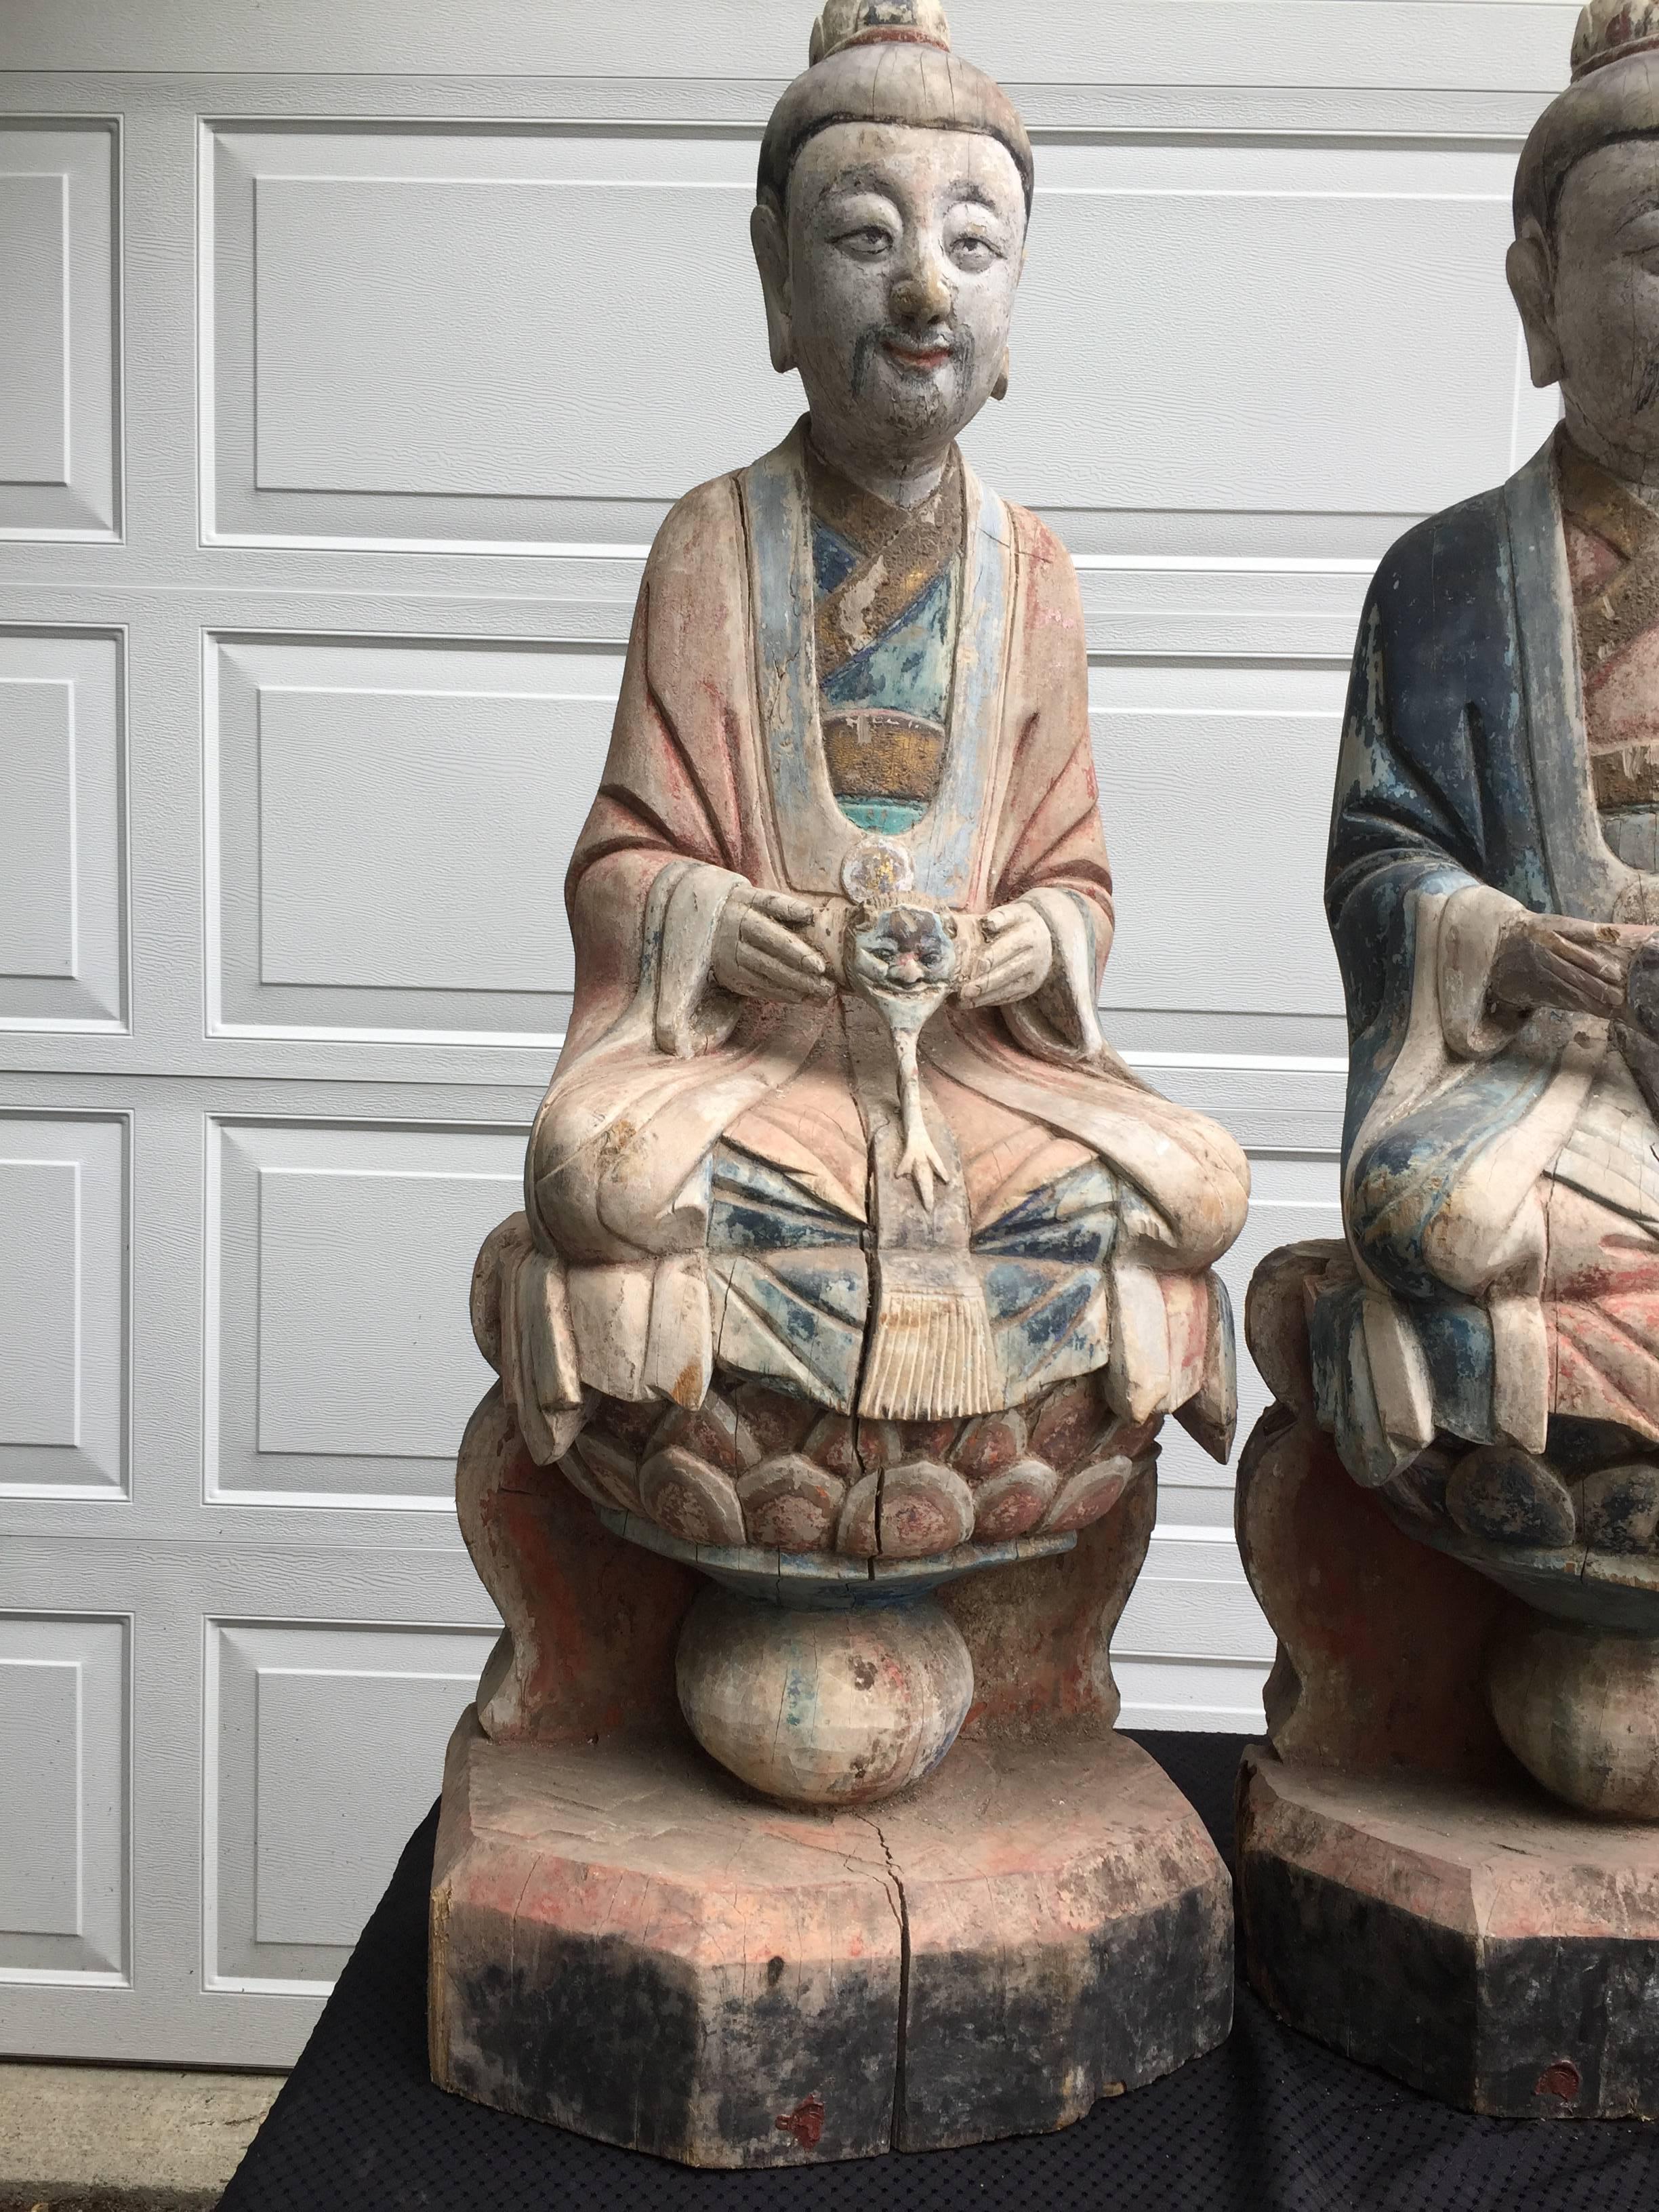 China, a  hand carved and hand painted wood group of three (3)  Taoist Trinity figures: The Three Pure Ones.

Measurements: 36 inches high and 14 inches wide and 10 inches deep each,

Age:  mid-late Qing dynasty, 18th-19th century.

Background: